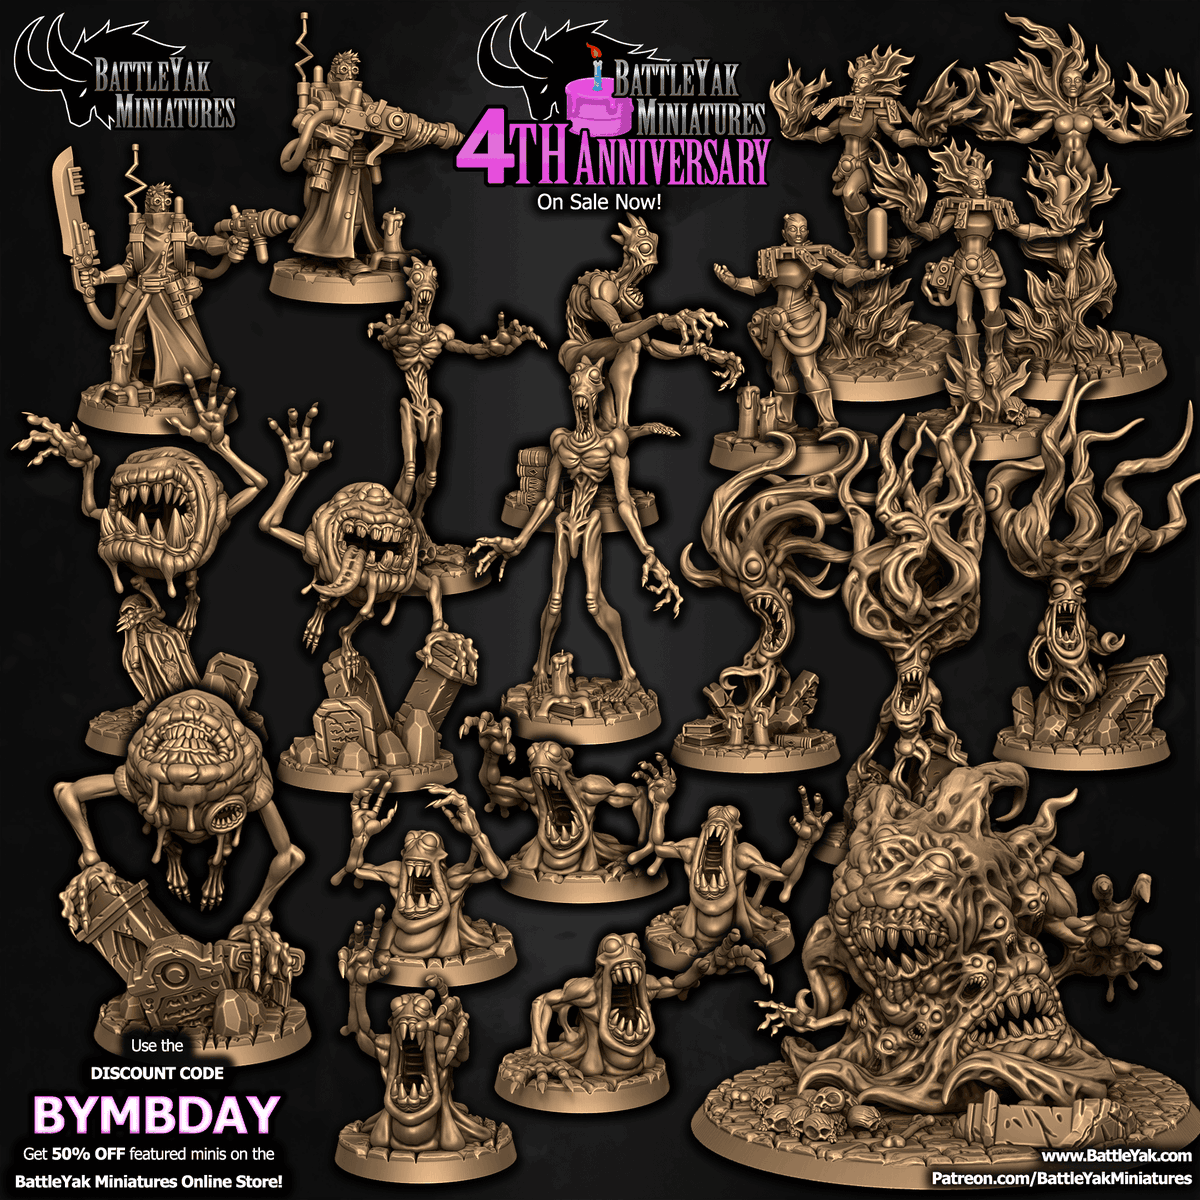 Battle Yak Miniatures turned 4 years old this March! Celebrate on the online store with the code BYMBDAY! battleyak.com #3dprinting #tabletopgaming #3Dsculpting #dnd #pathfinder #wargaming #ttrpg #eldritch #ghosts #miniatures